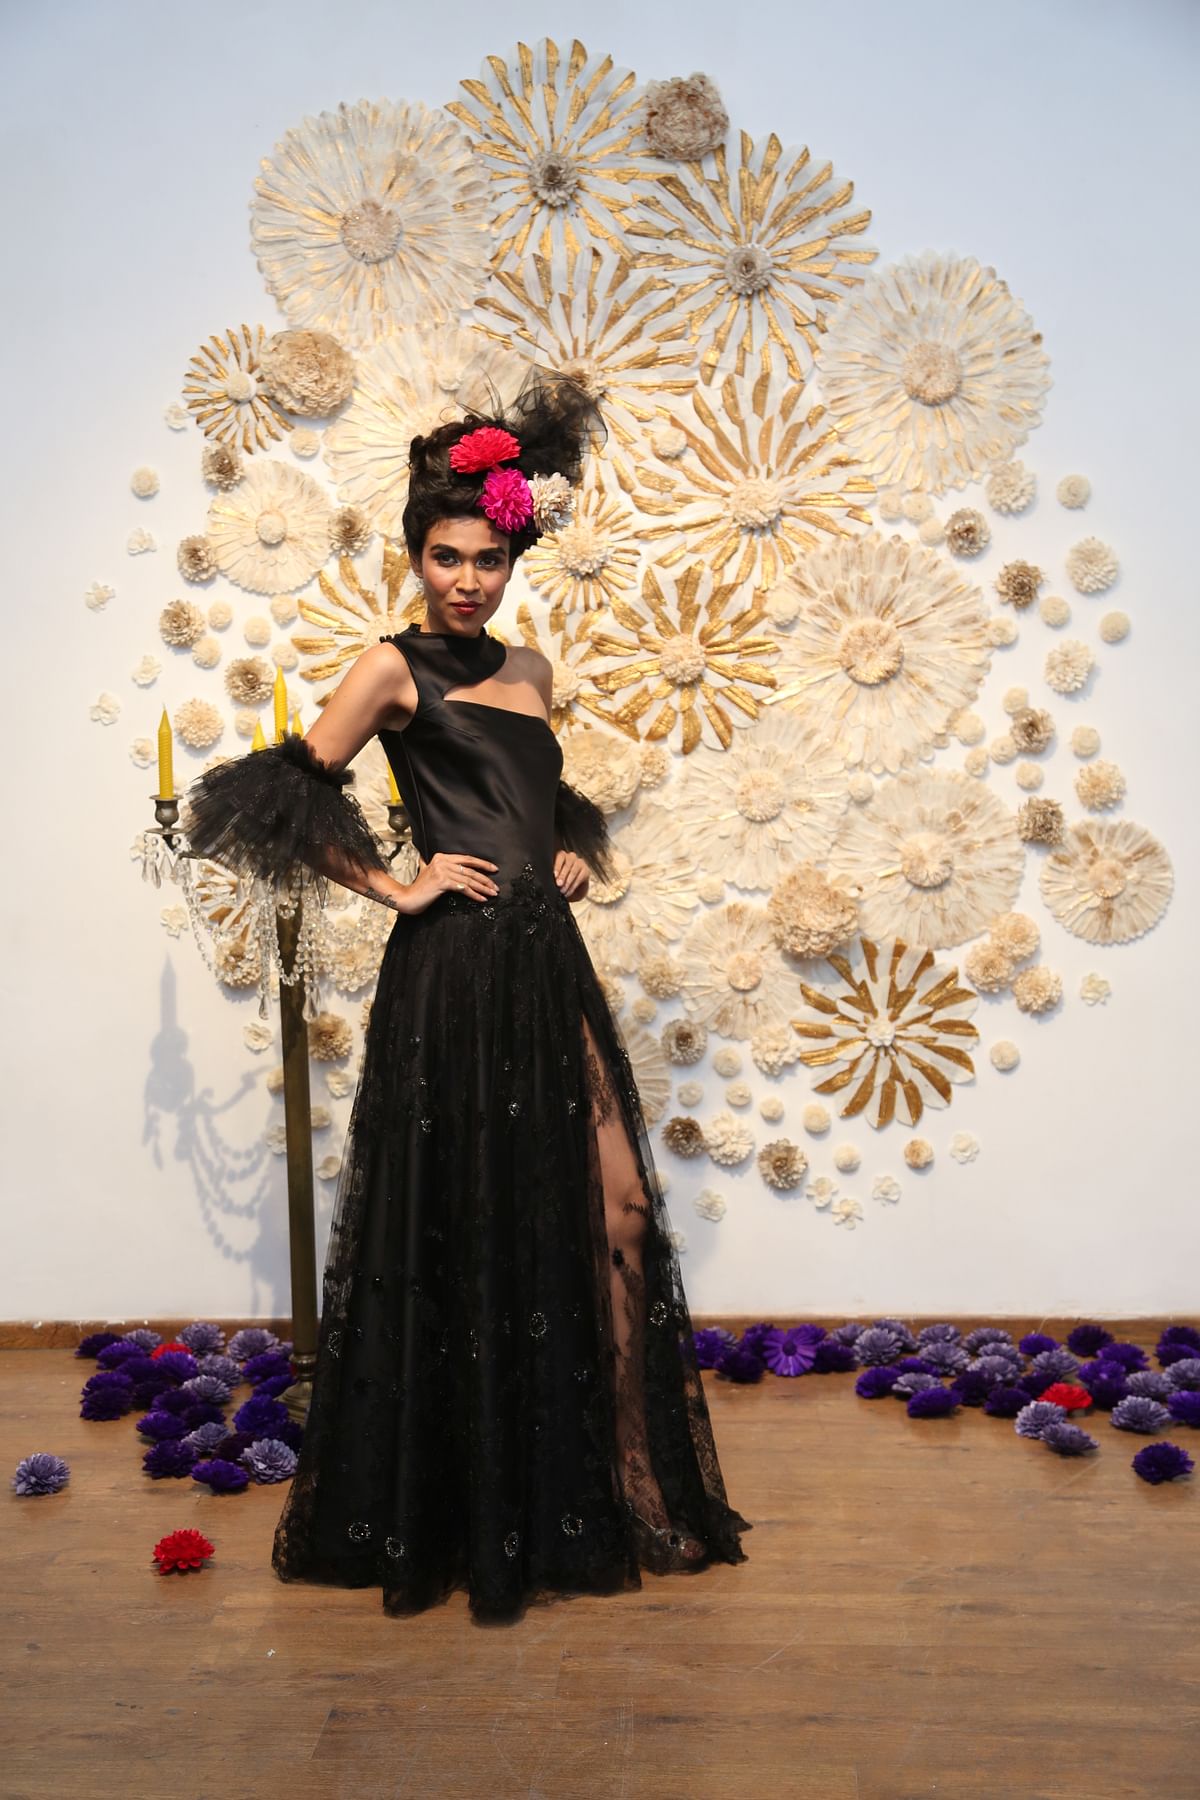 Fashion Designer Neeva Debnath is back to her roots with designs that bring the Orient and Occident together.